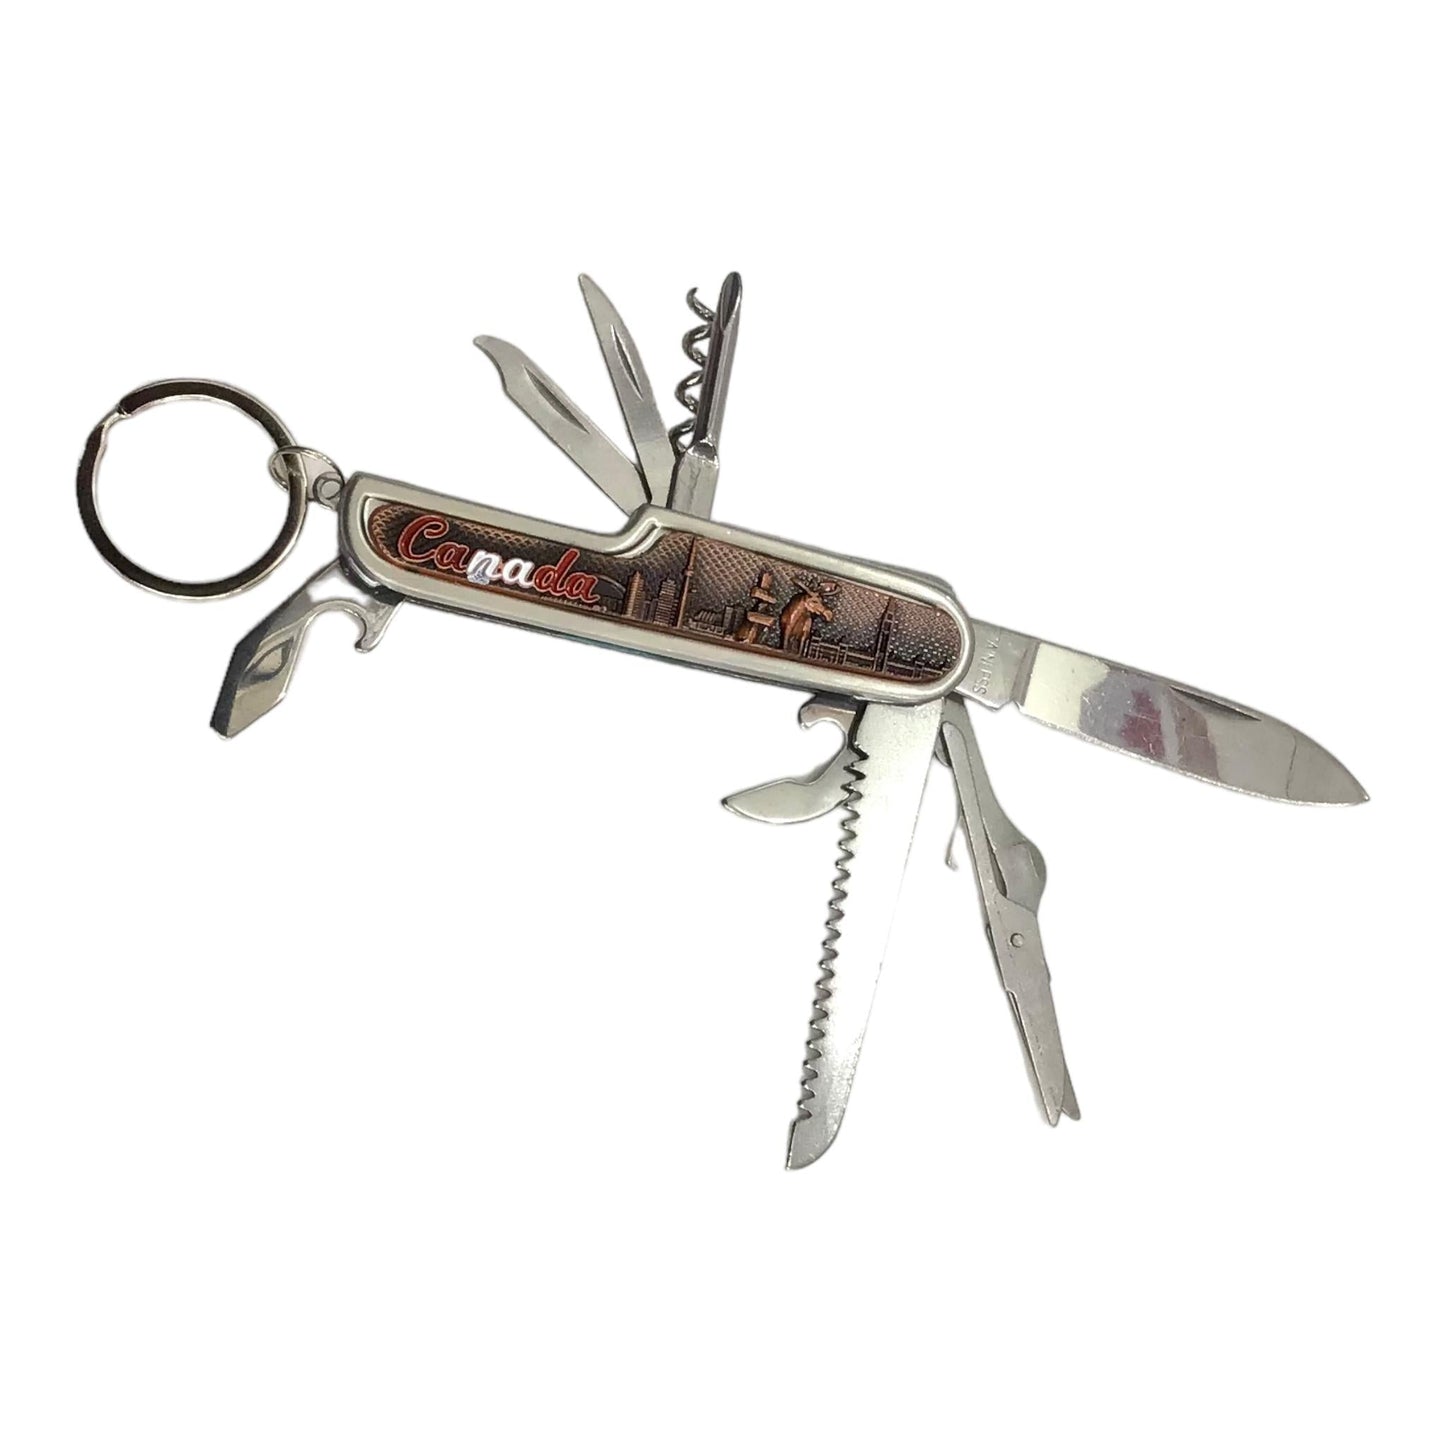 Canada Scenic Pocket Multitool with Safety Locking